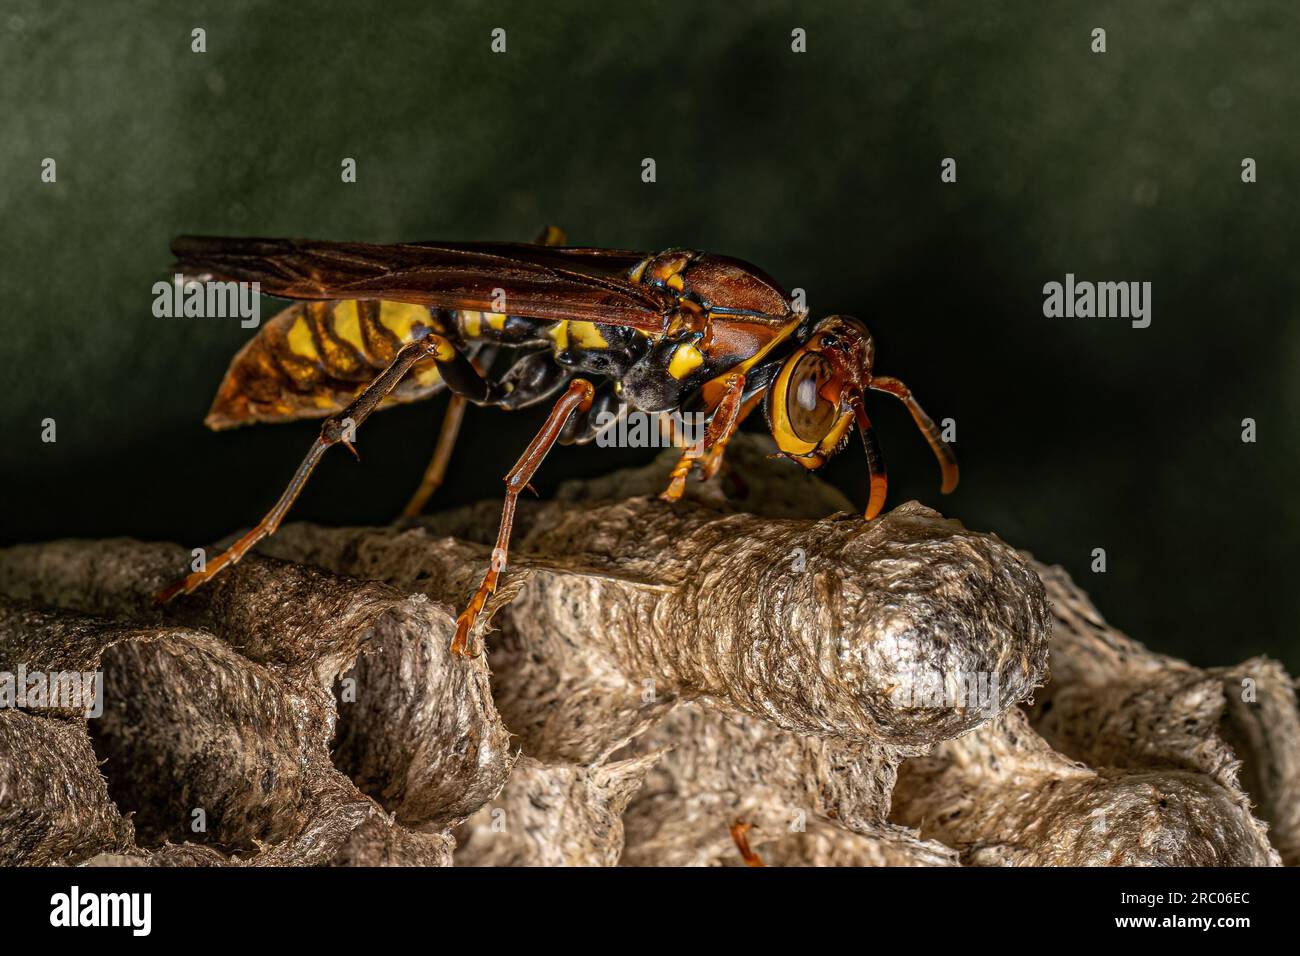 Variegated Paper Wasp of the species Polistes versicolor Stock Photo